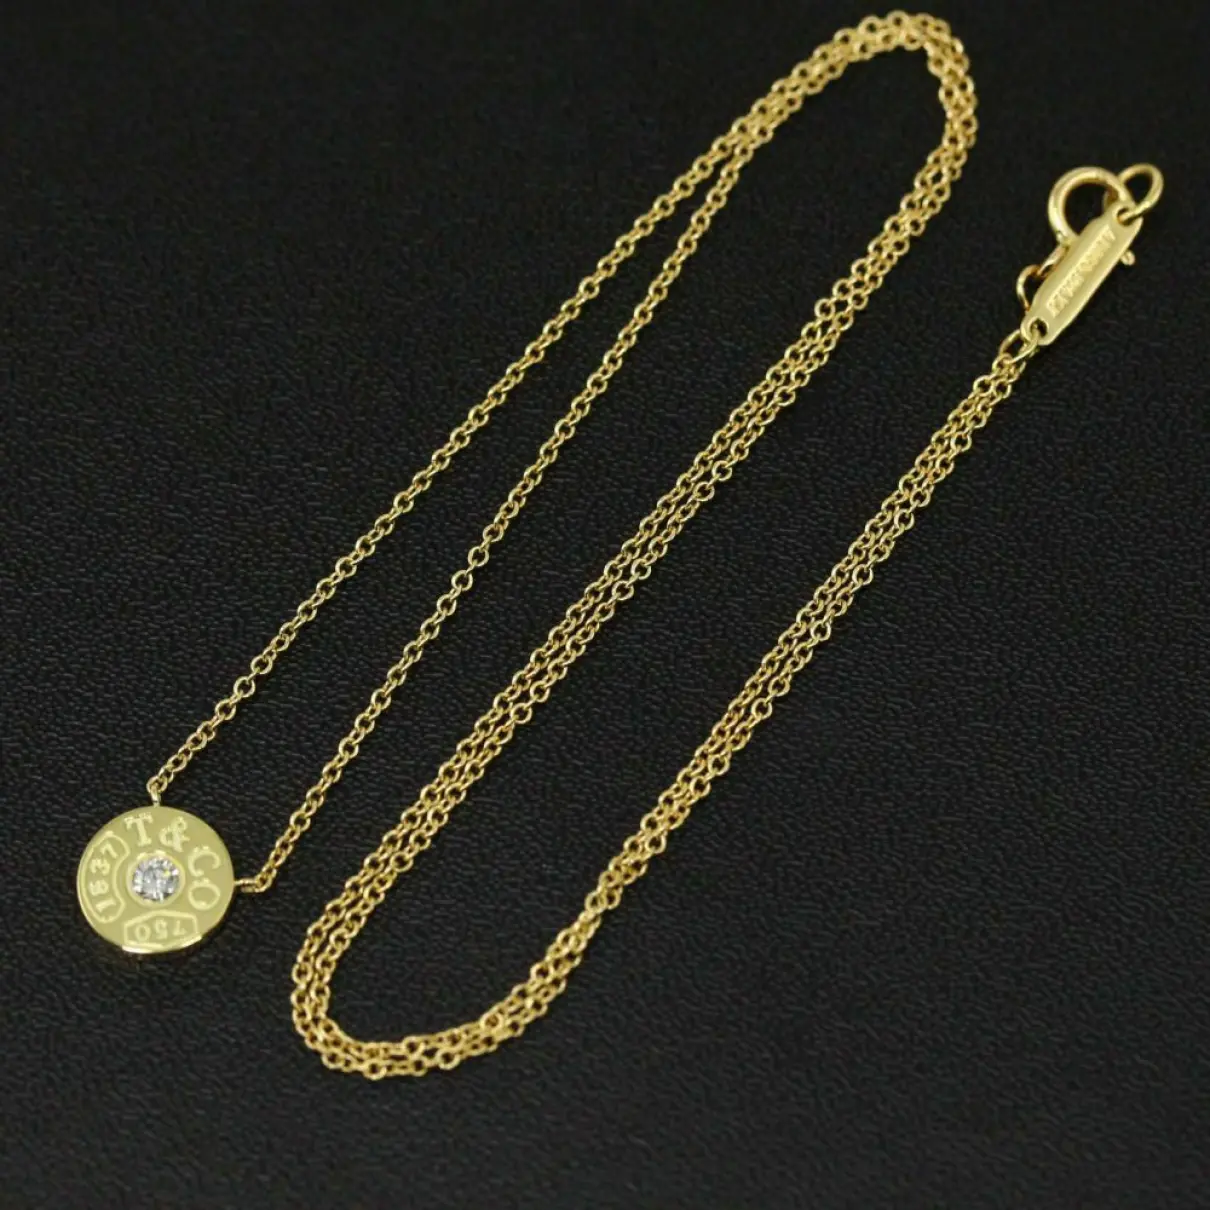 Buy Tiffany & Co Yellow gold necklace online